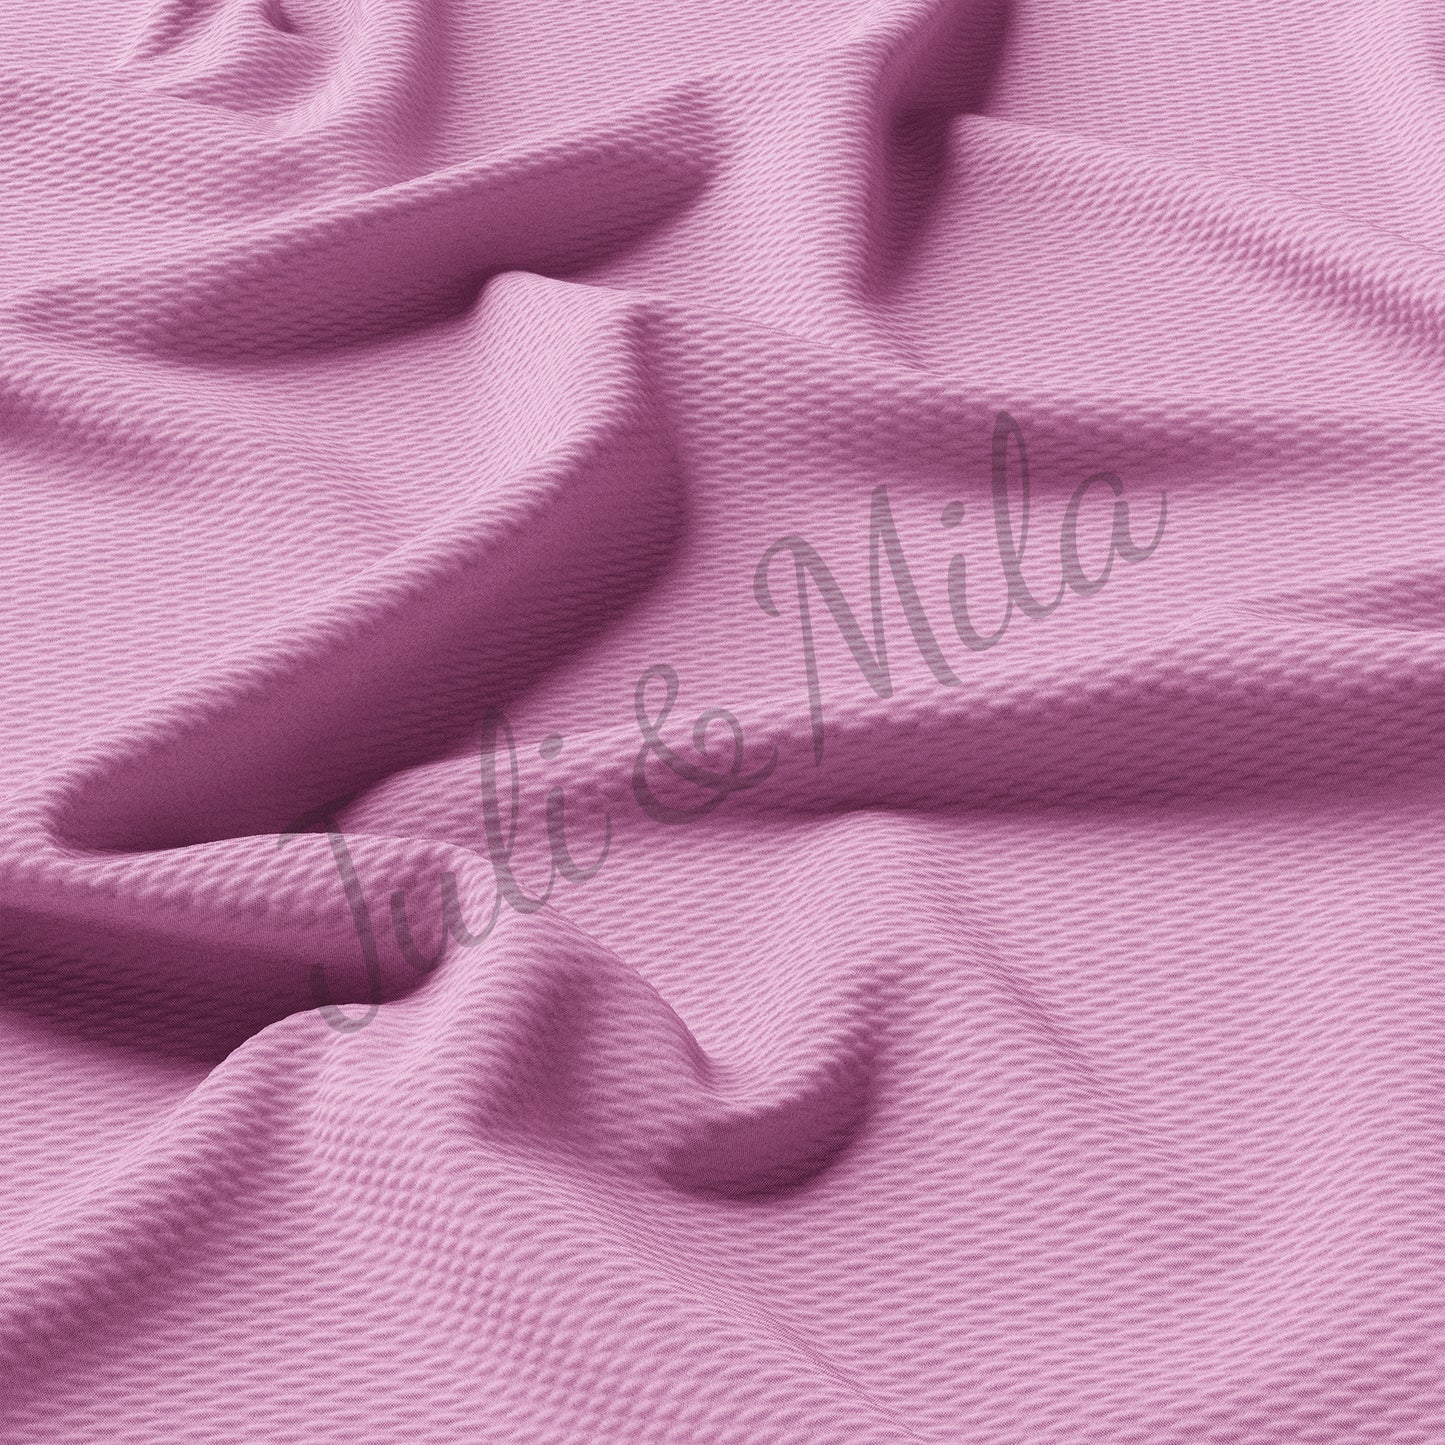 Pastel Rose Liverpool Bullet Textured Fabric